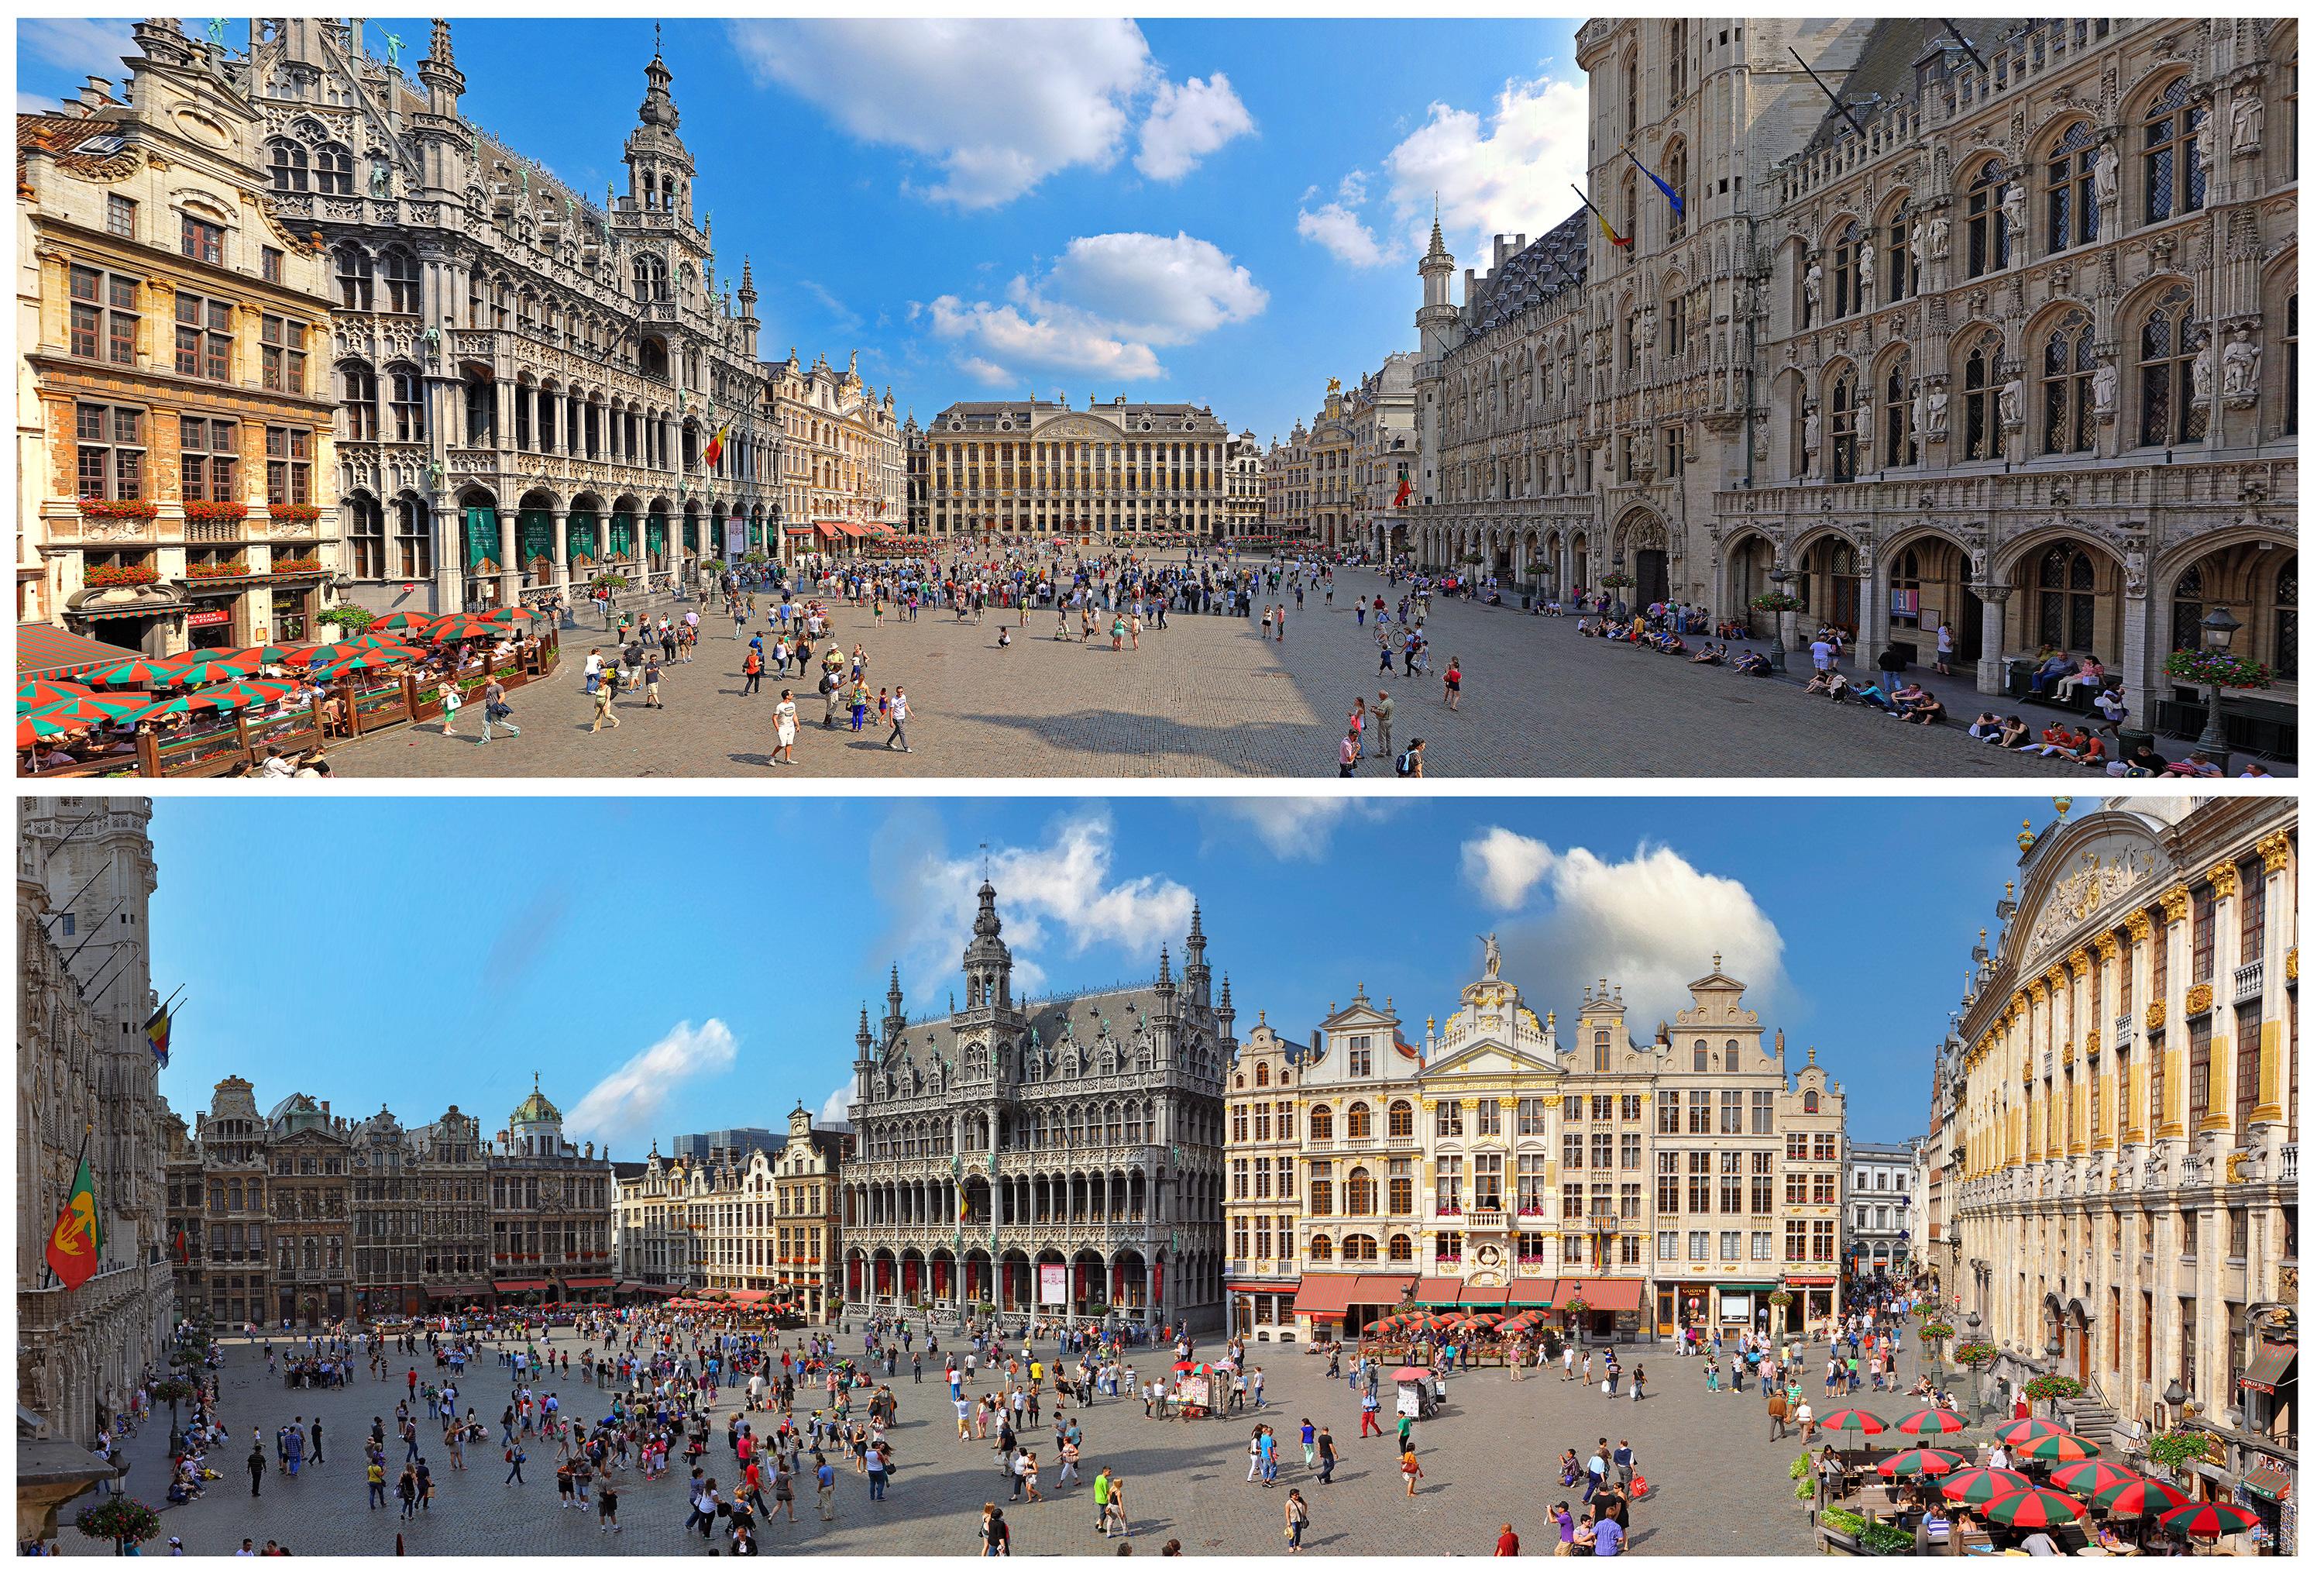 Jean Pierre De Neef Color Photograph - The Grand Place of Brussel - 2013 - Full Framed color panoramic photography 